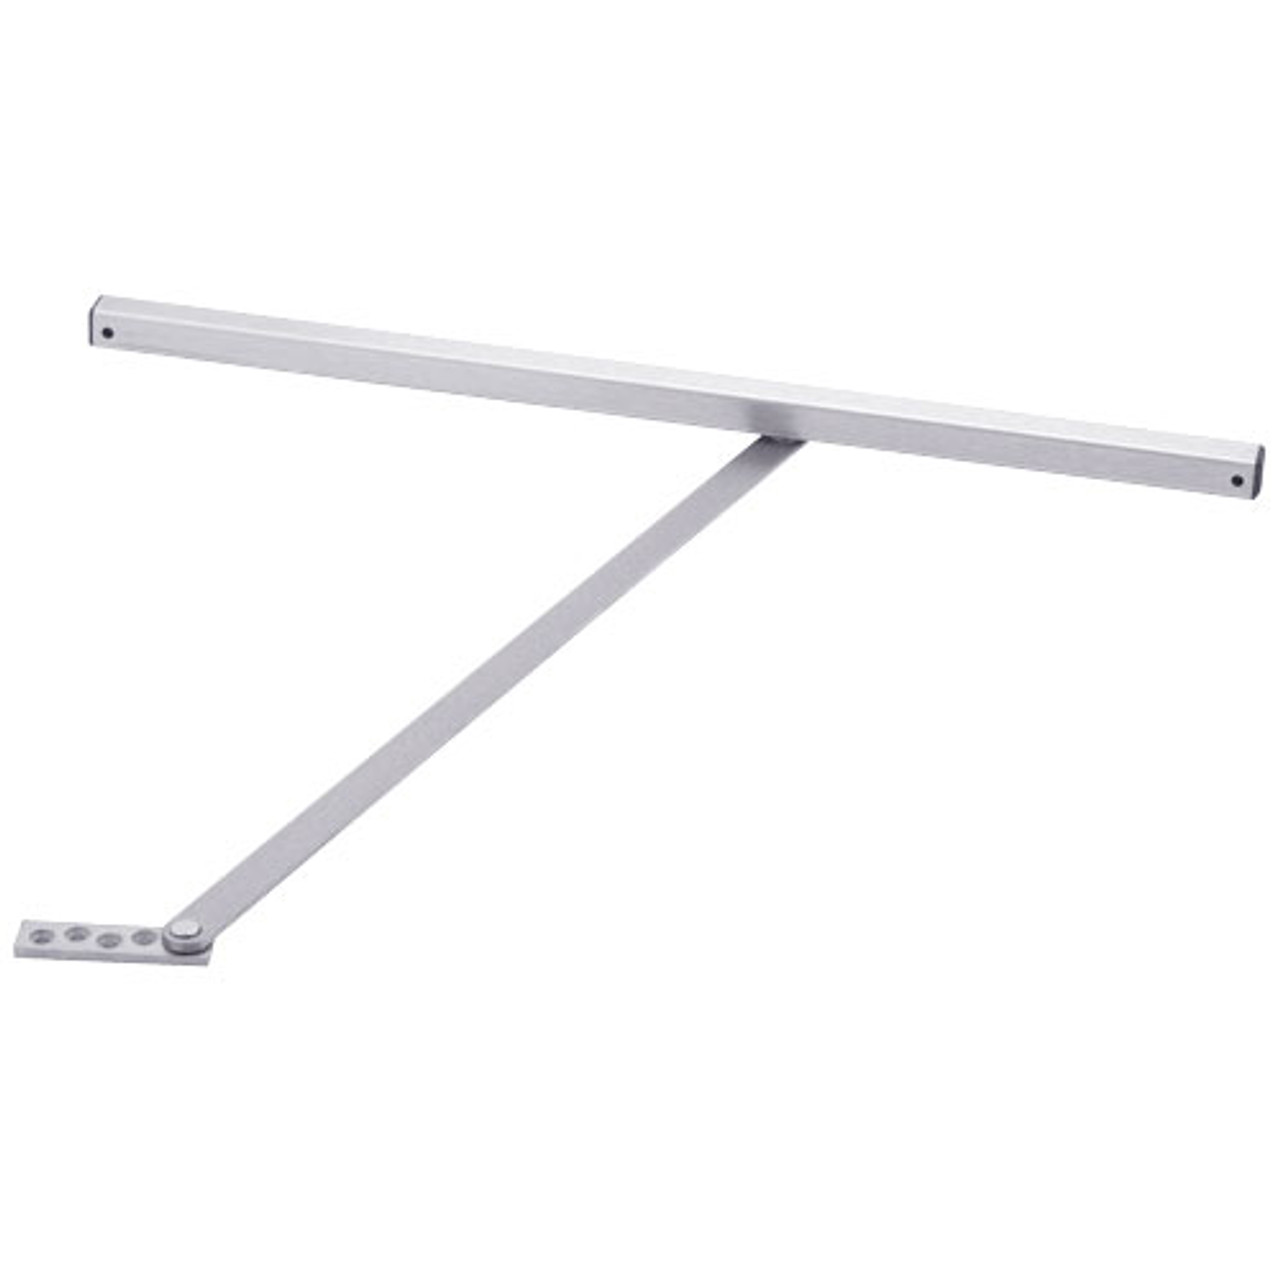 452H-US32-SHIM-3 Glynn Johnson 450 Series Medium Duty Surface Overhead in Polished stainless steel